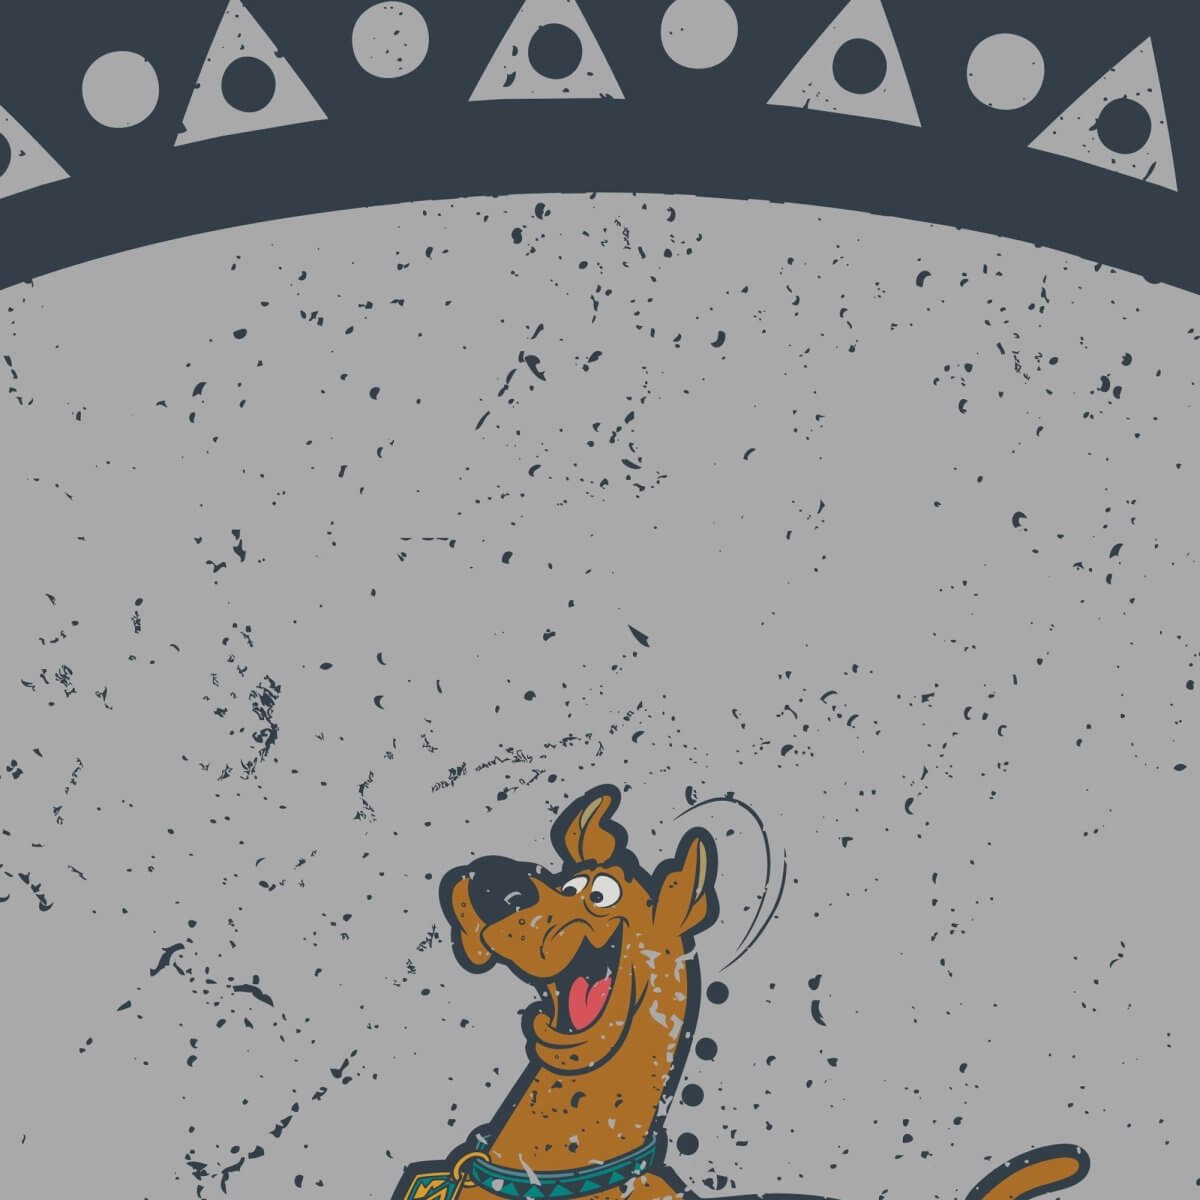 Kismet Decals Home & Room Decor Scooby-Doo Saves the Day! Wall decal sticker - officially licensed - latex printed with no solvent odor - Kismet Decals